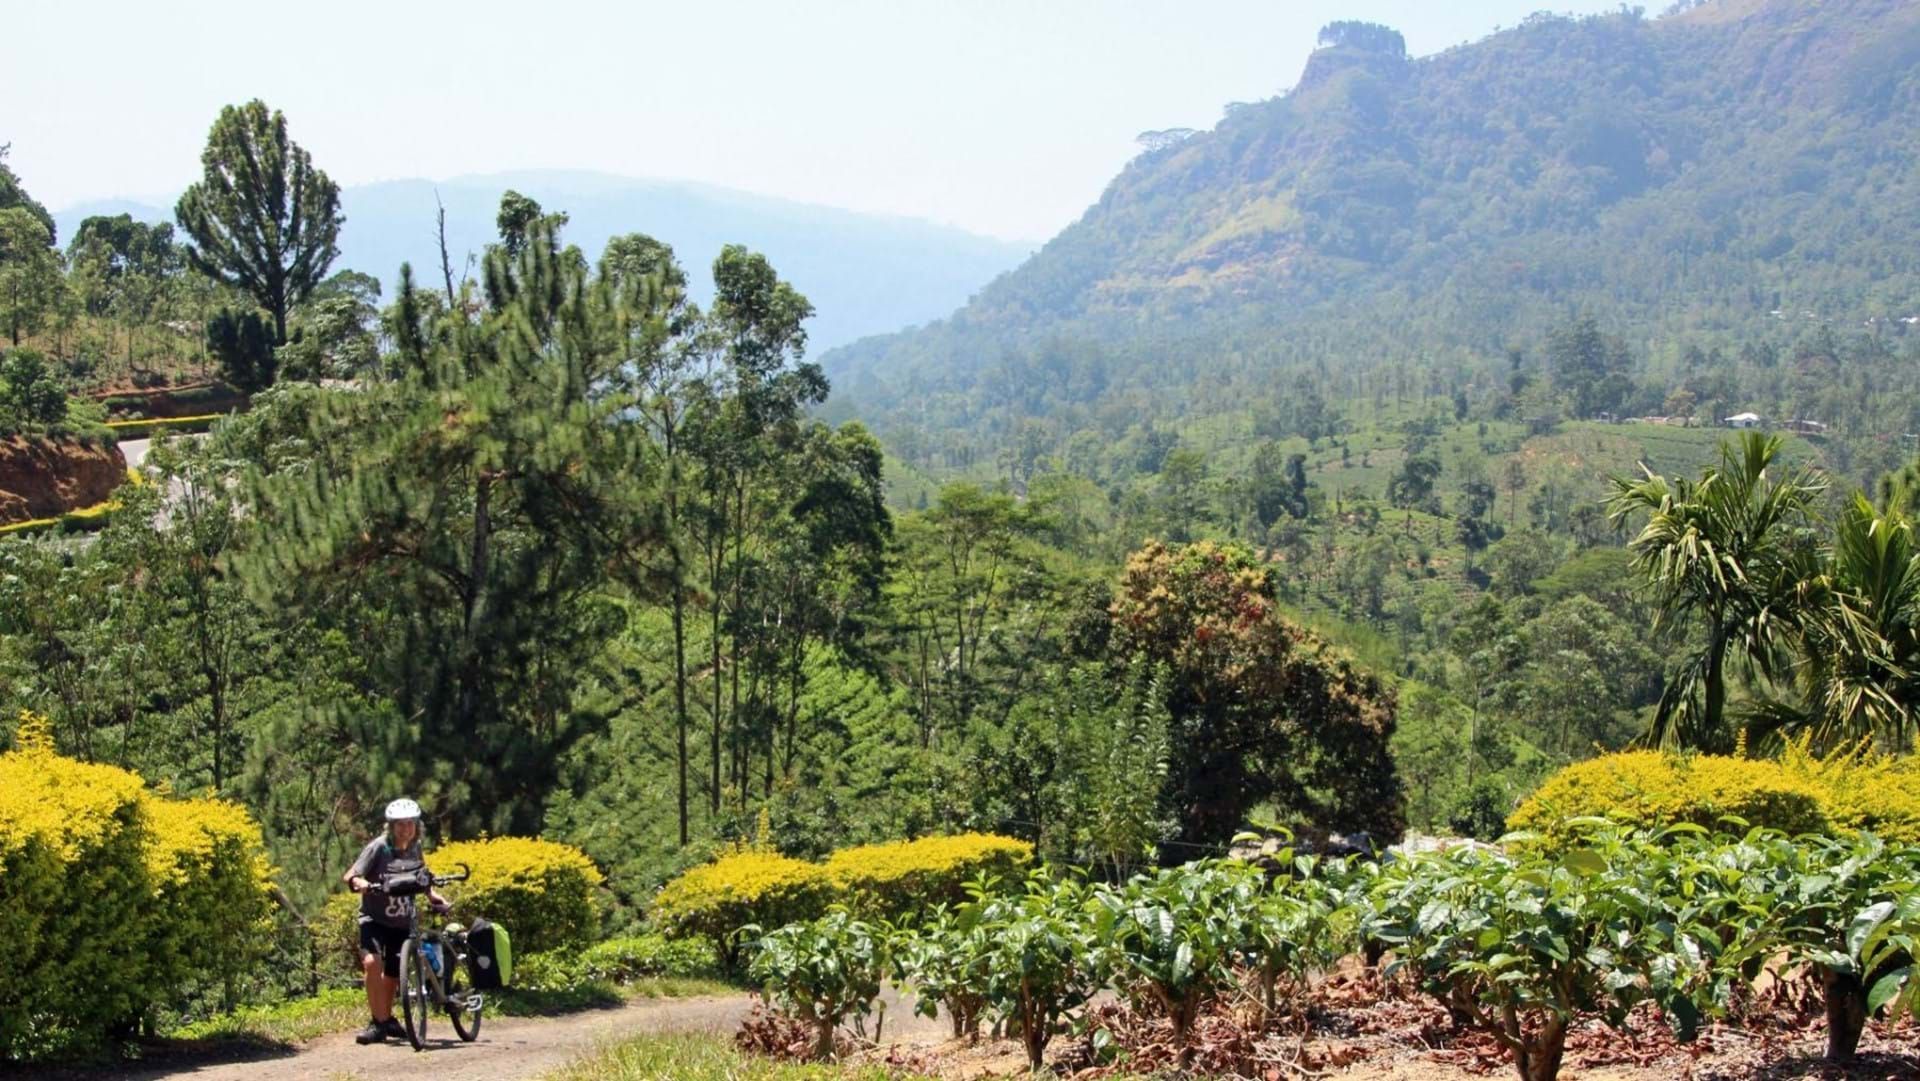 How did you find cycling in Sri Lanka?